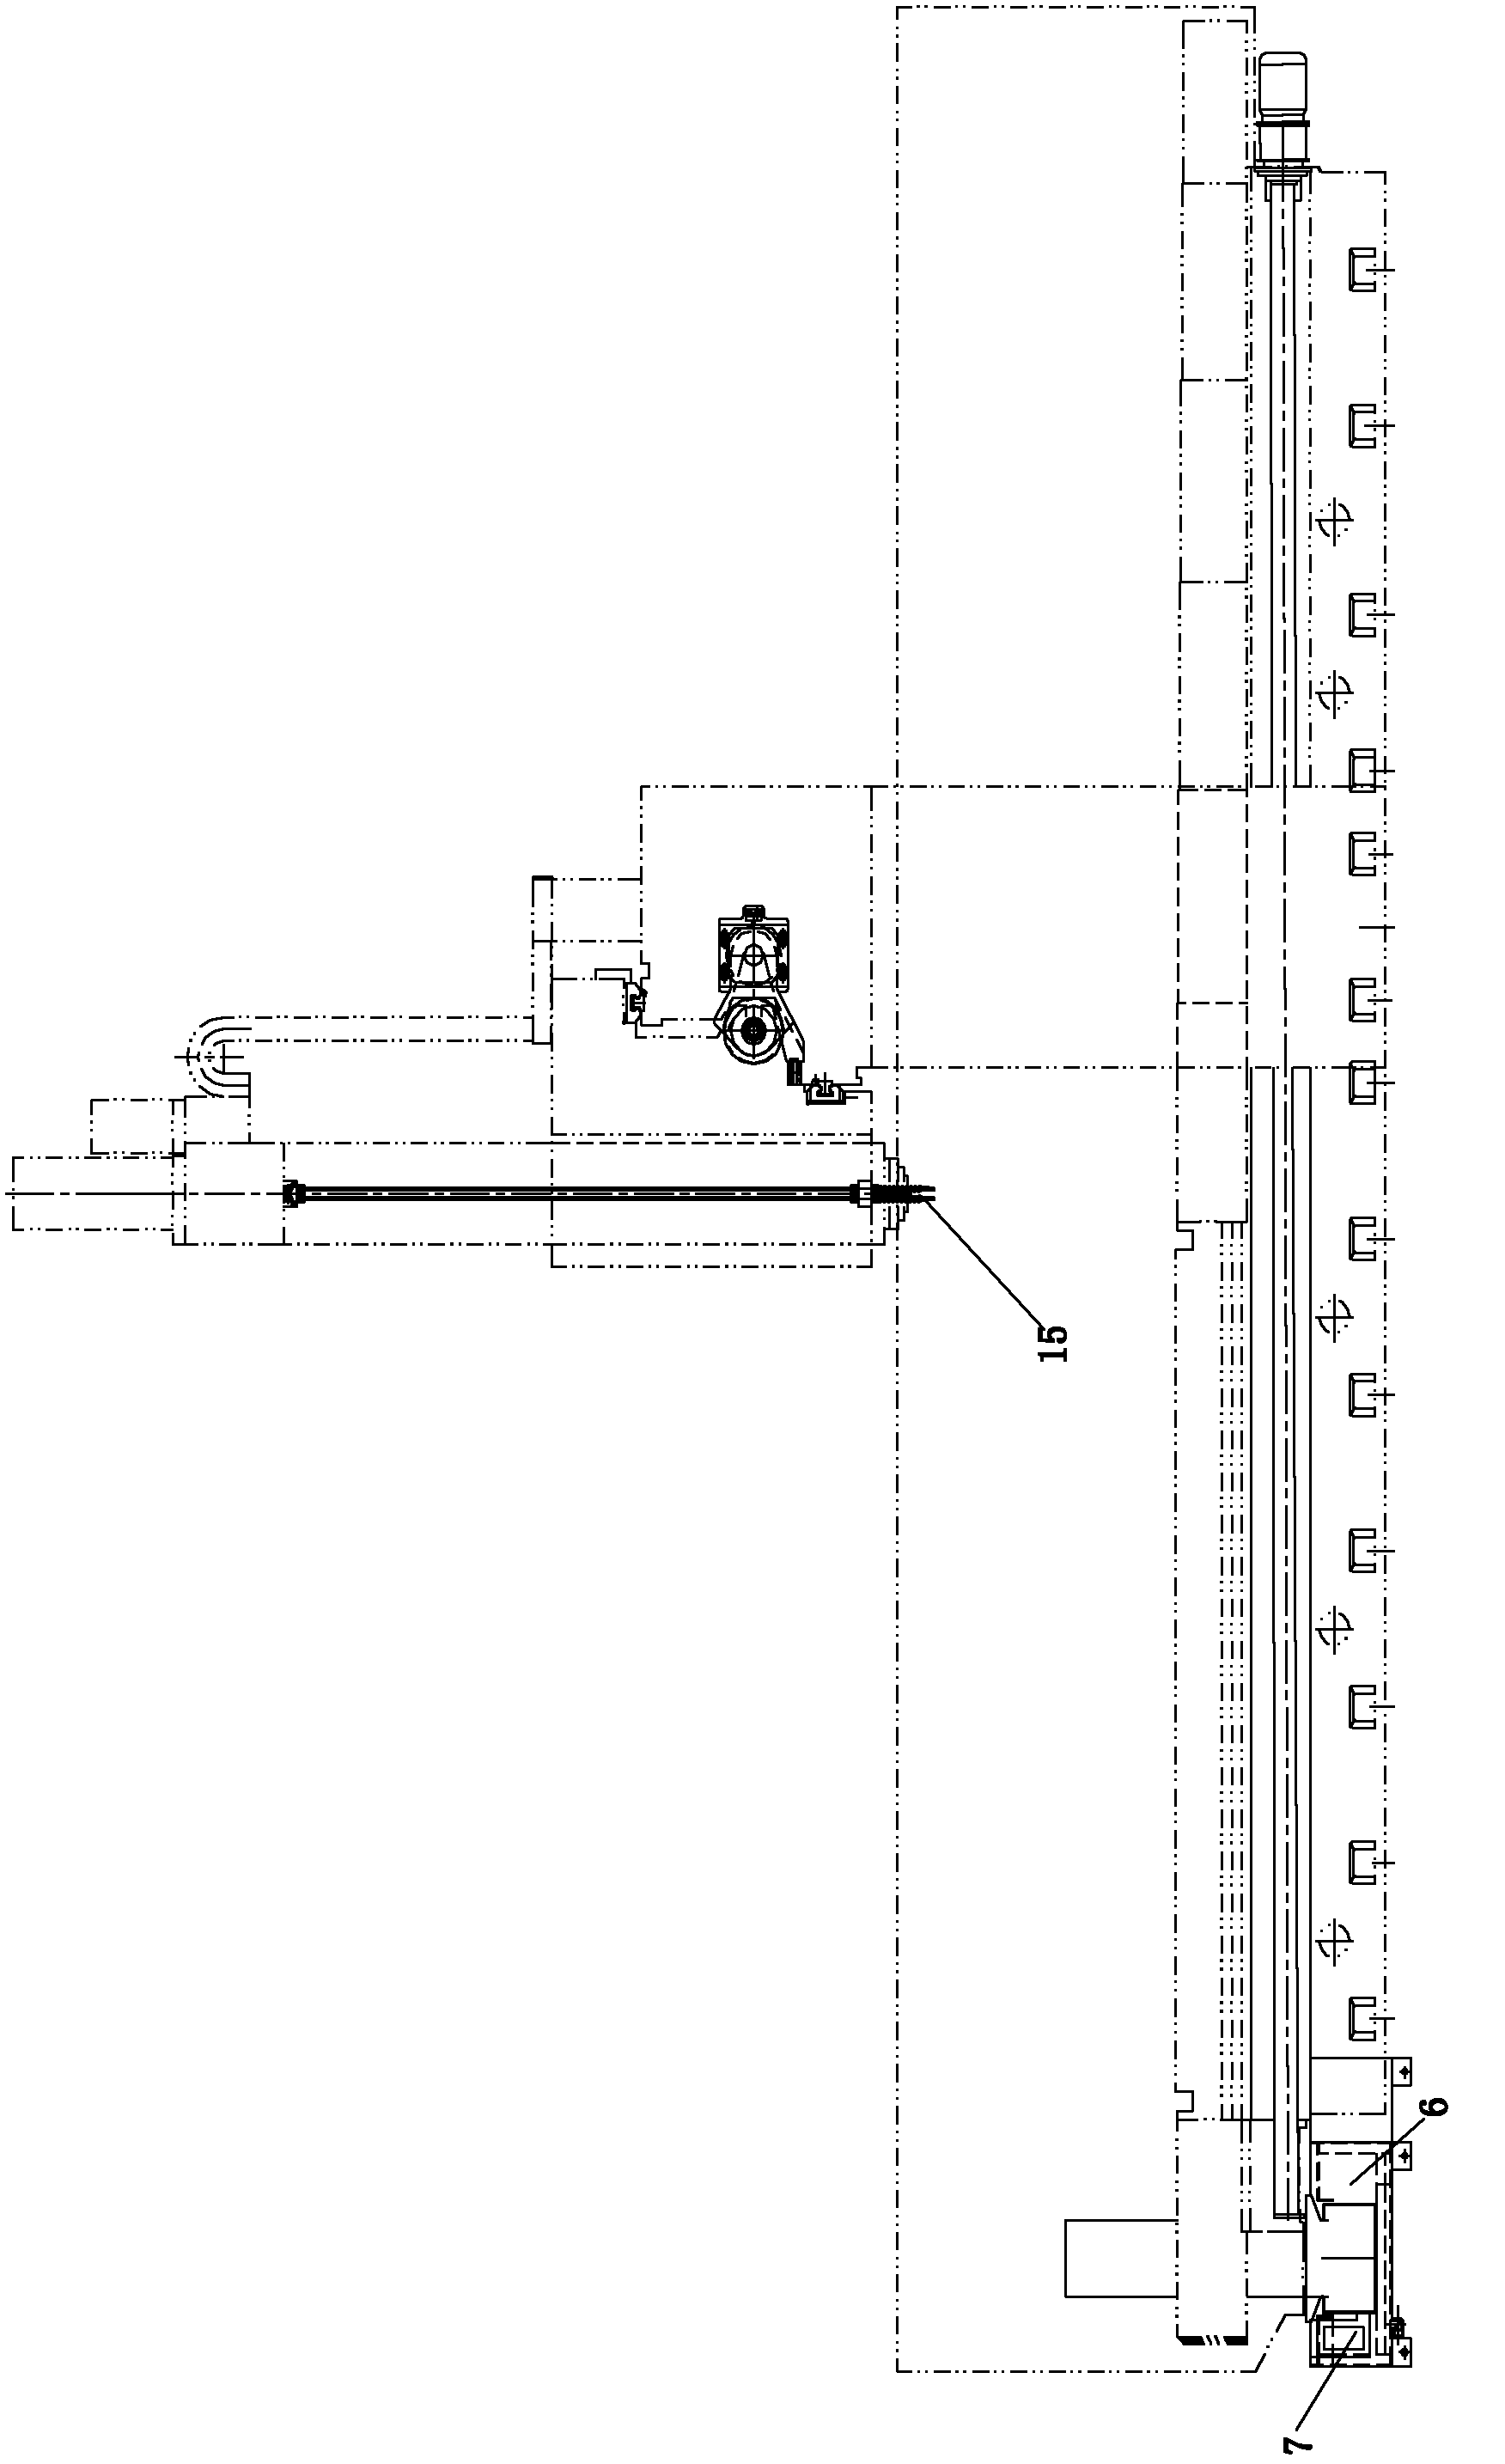 Filtering and cooling device for computerized numerical control gantry machine tool